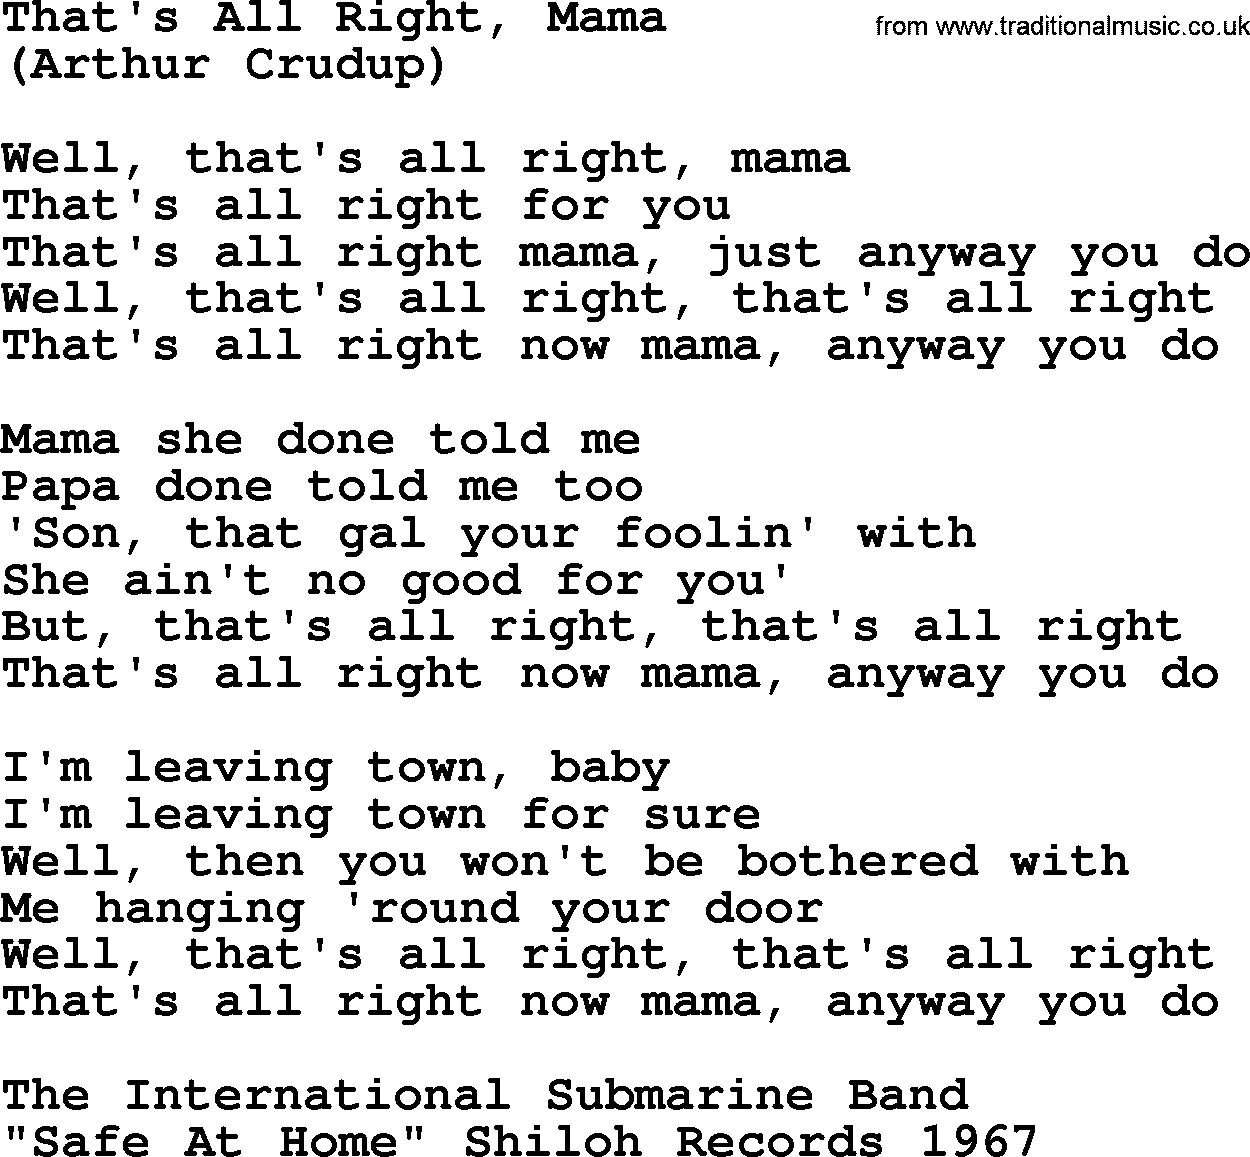 The Byrds song That's All Right, Mama, lyrics